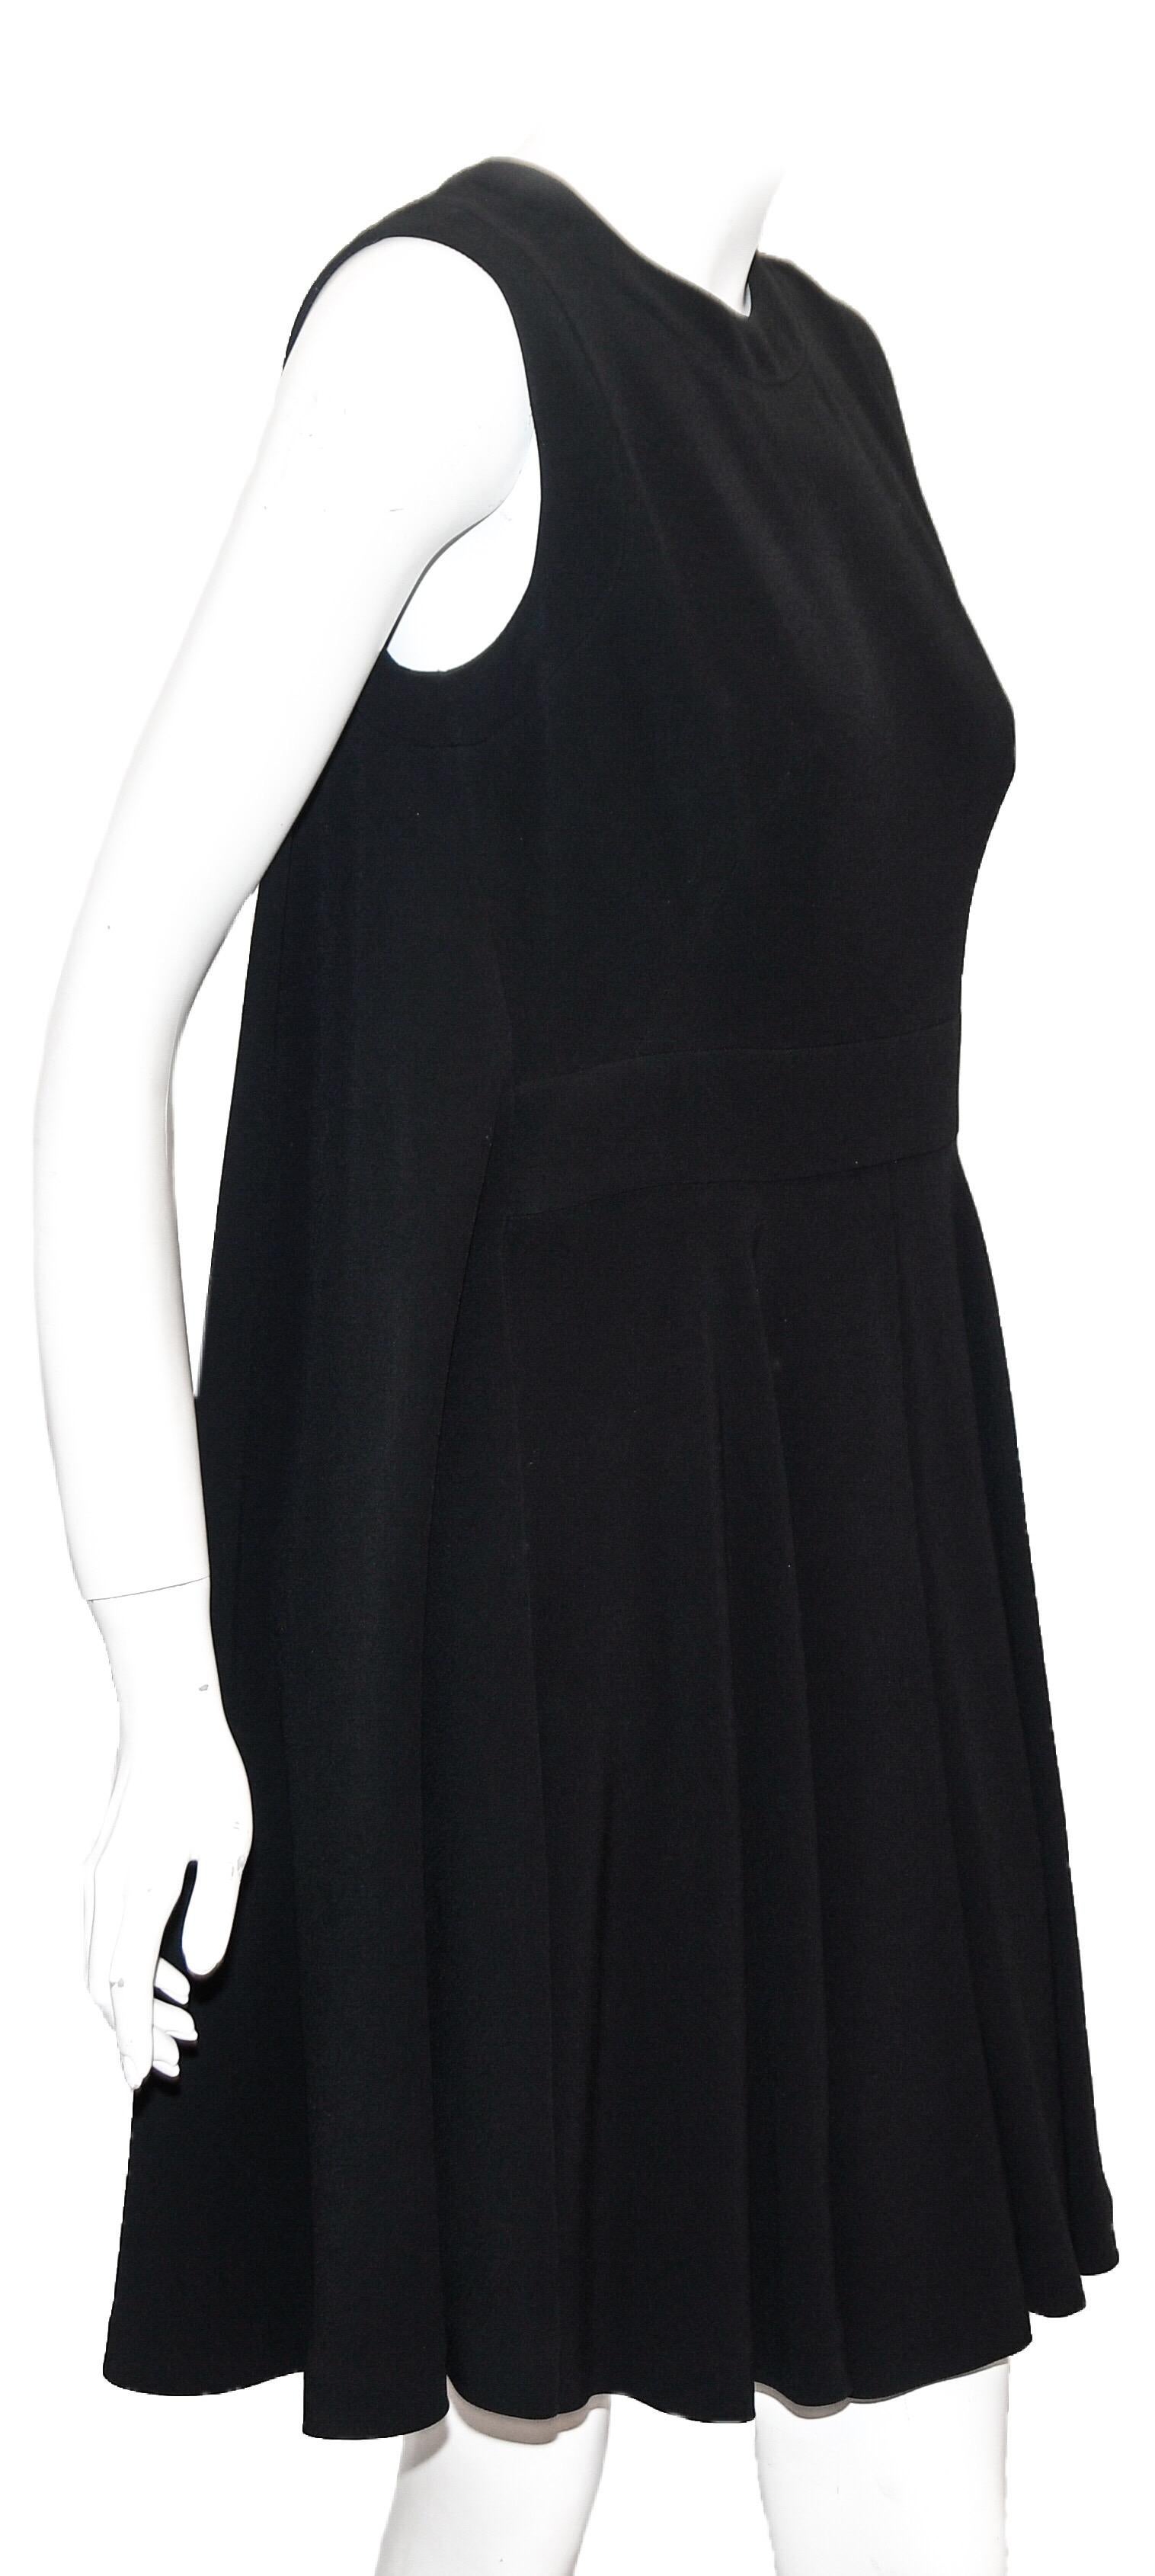 Alexander McQueen Black Silk Paneled Sleeveless Trapeze Dress 44 EU In Excellent Condition For Sale In Palm Beach, FL